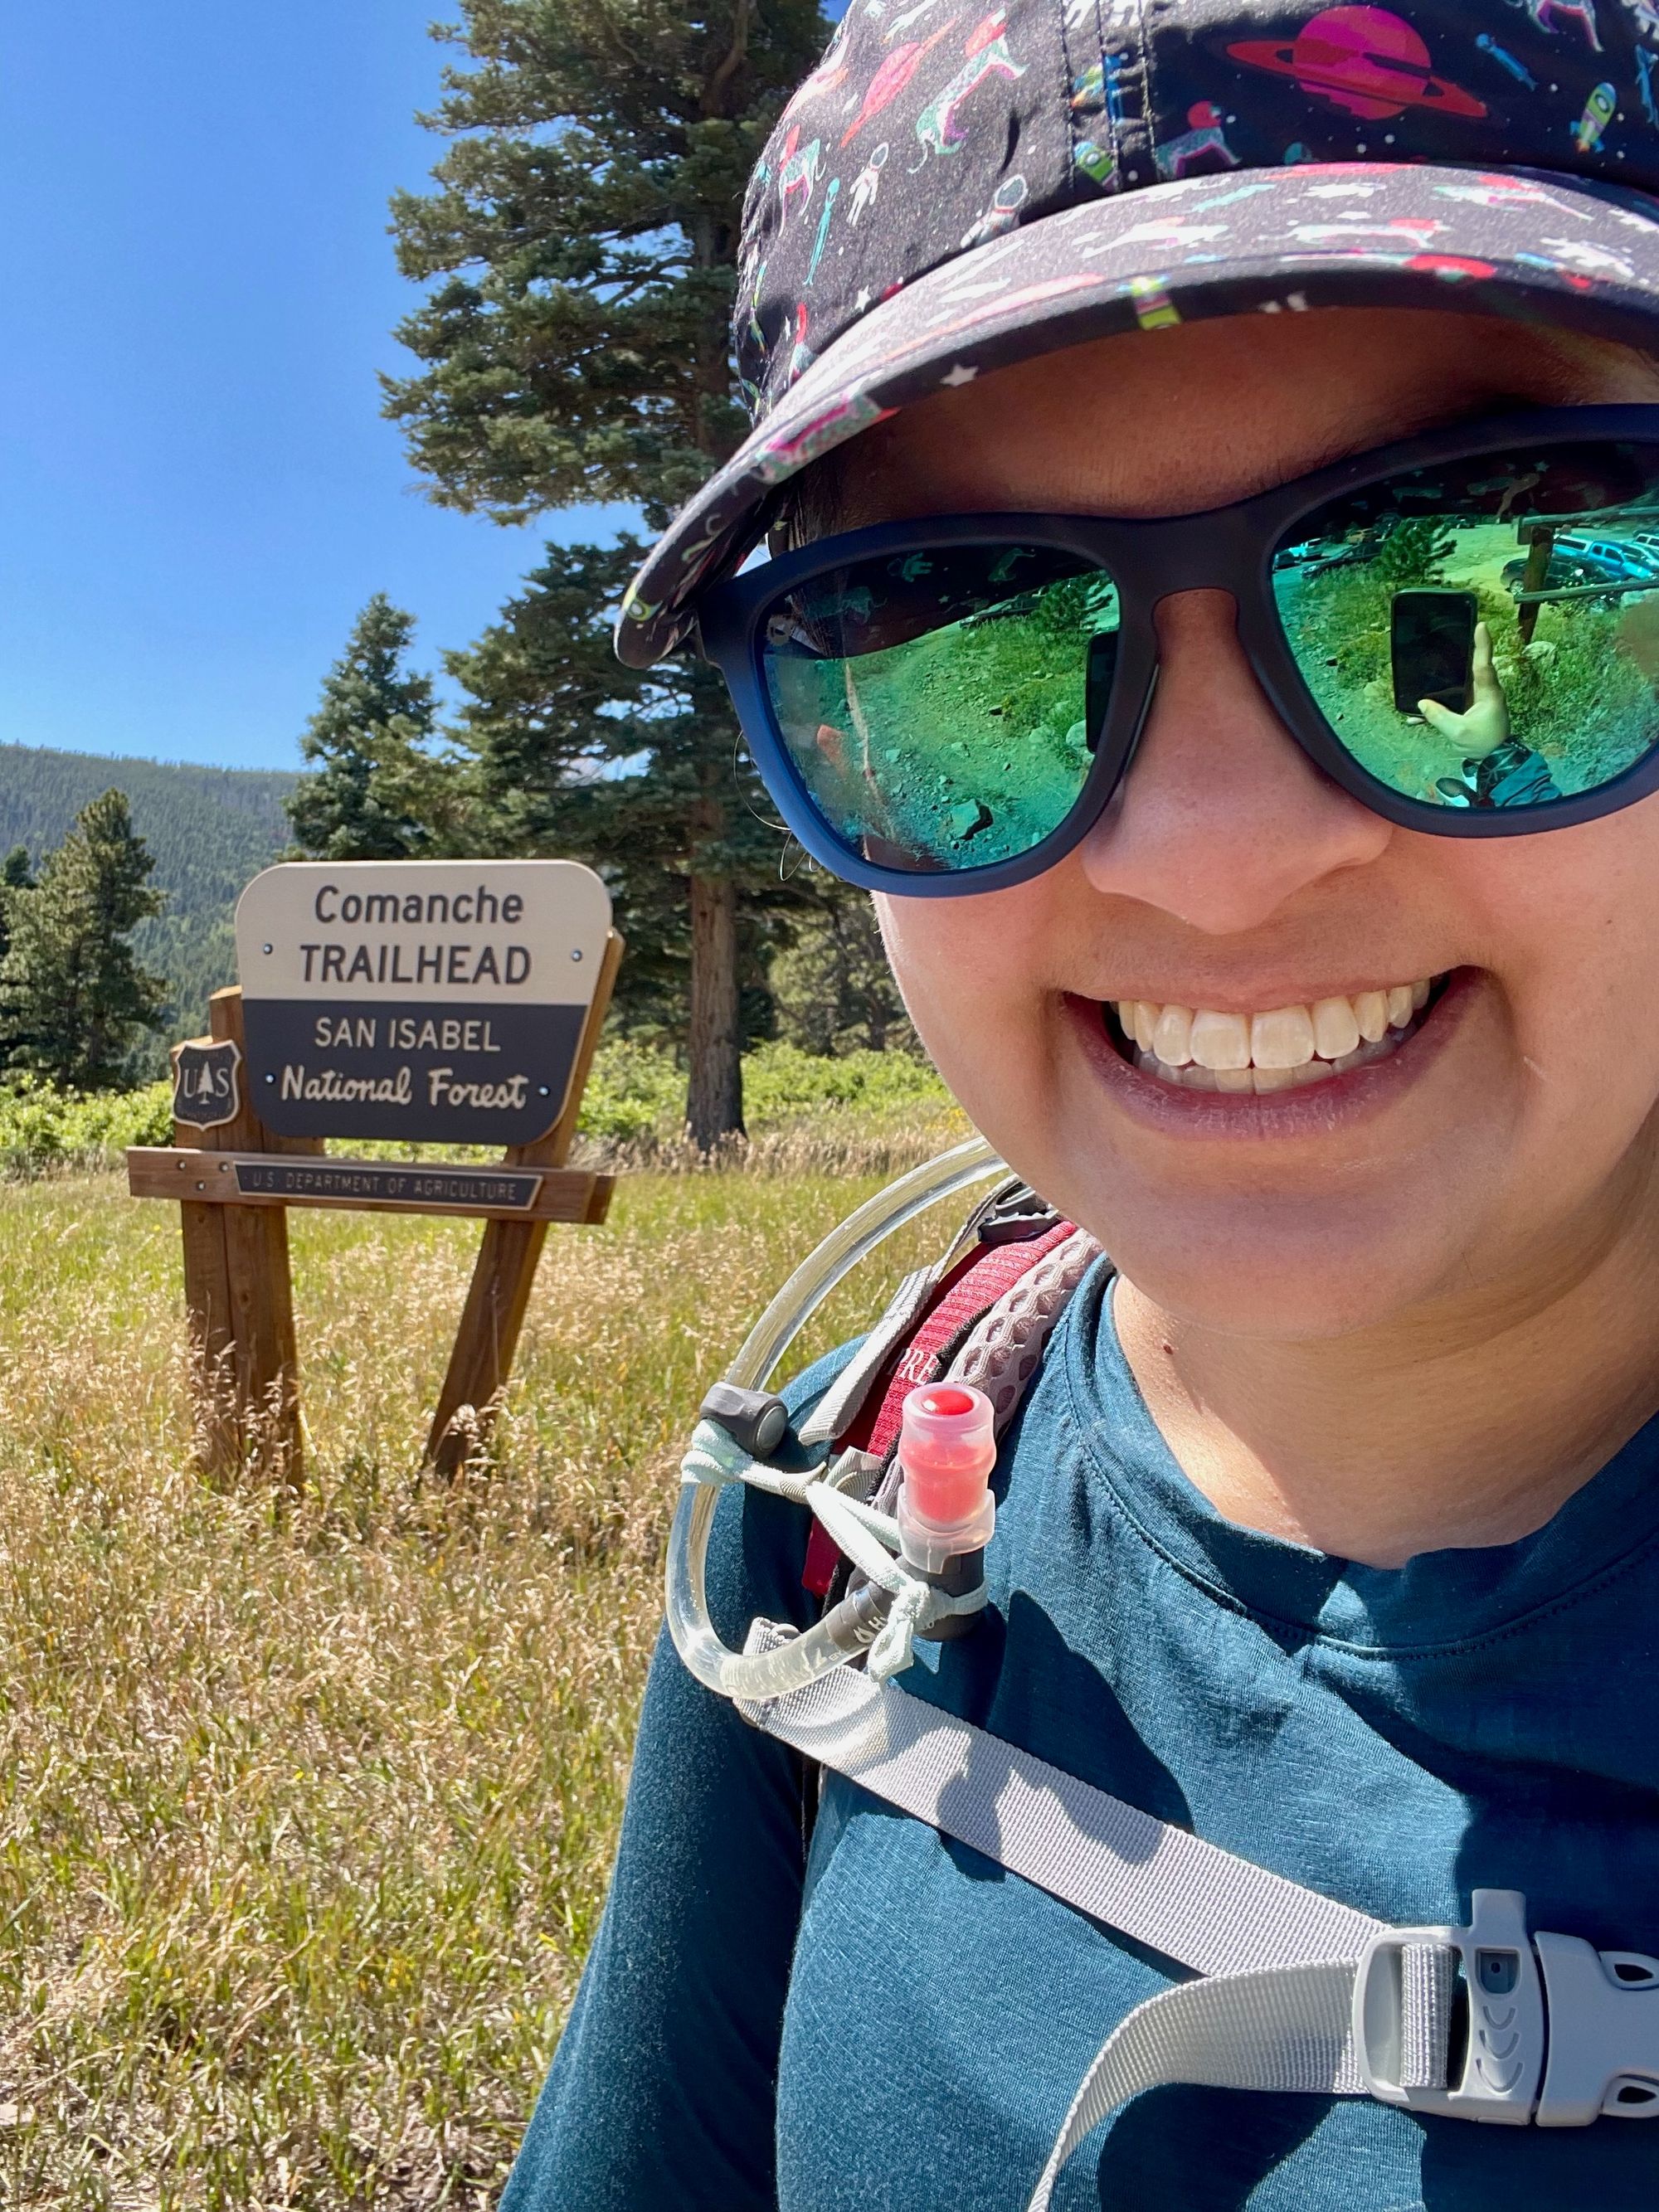 Travelogue: Solo Backpacking the Venable-Comanche Trail